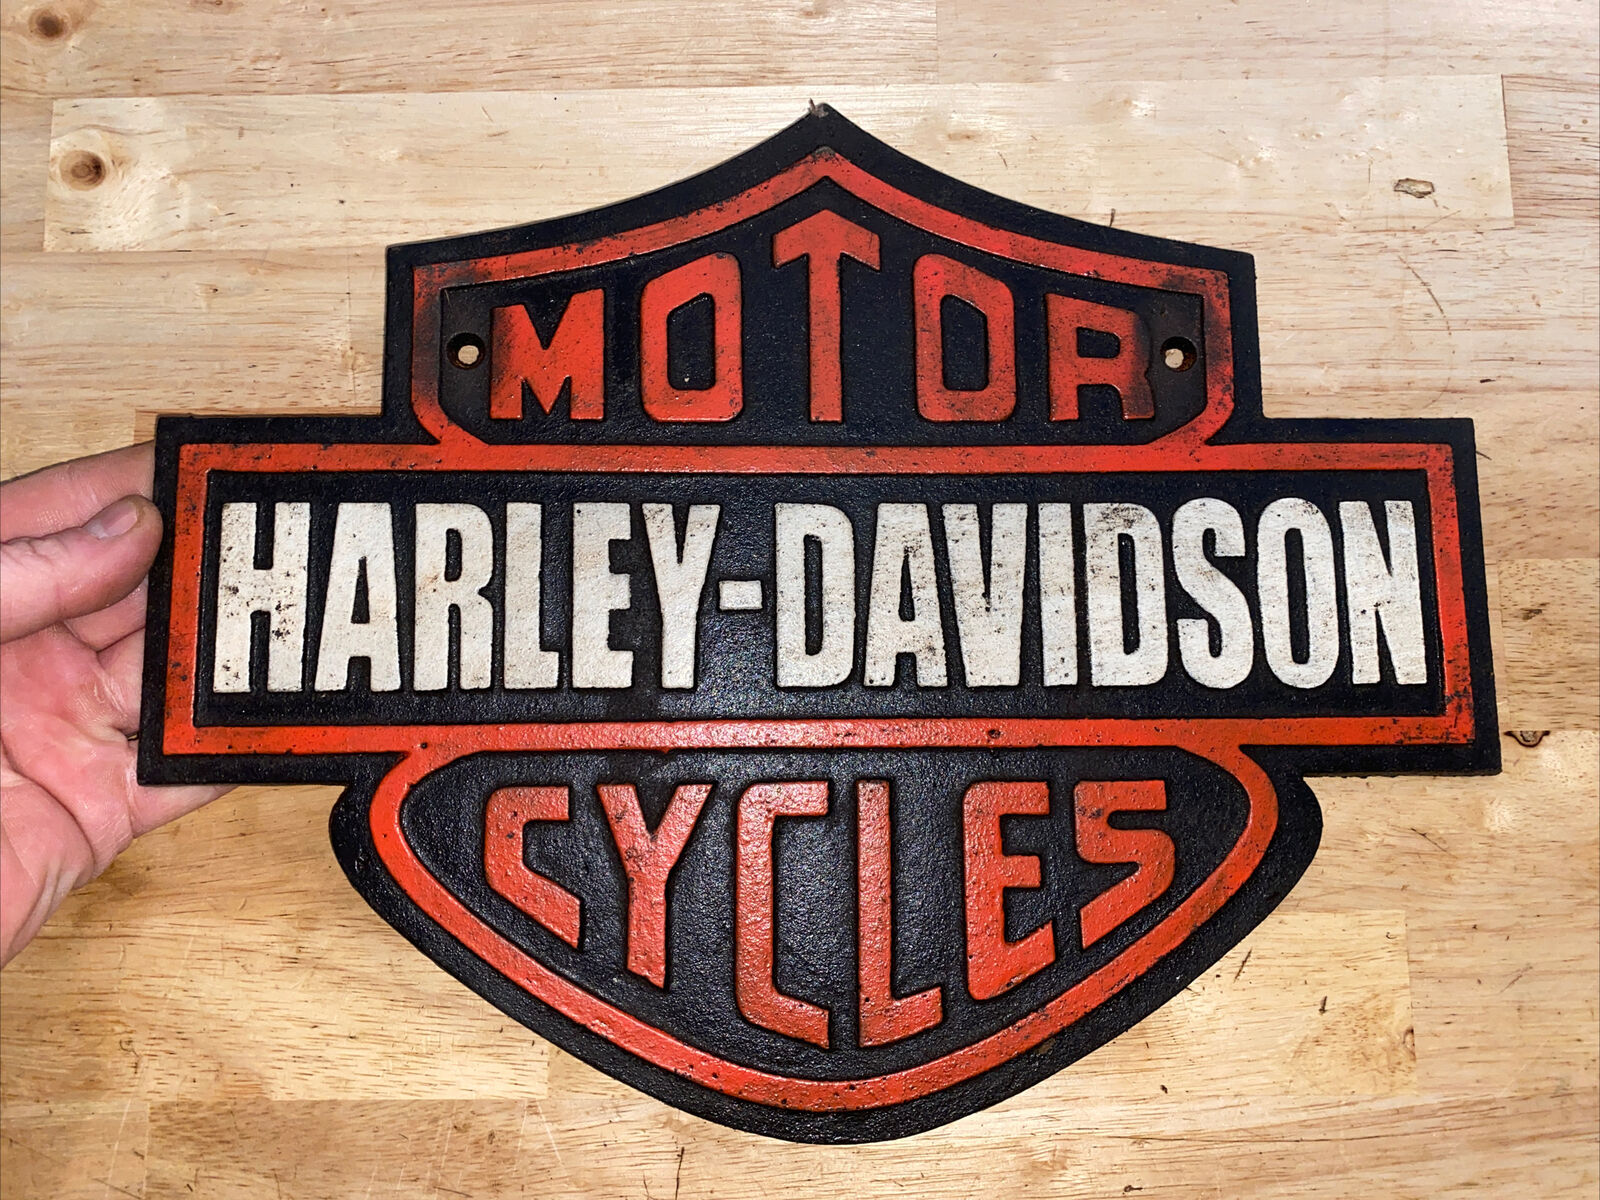 Harley Davidson Cast Iron Sign Plaque Motorcycles Collector Patina 4+LBS BLEMISH